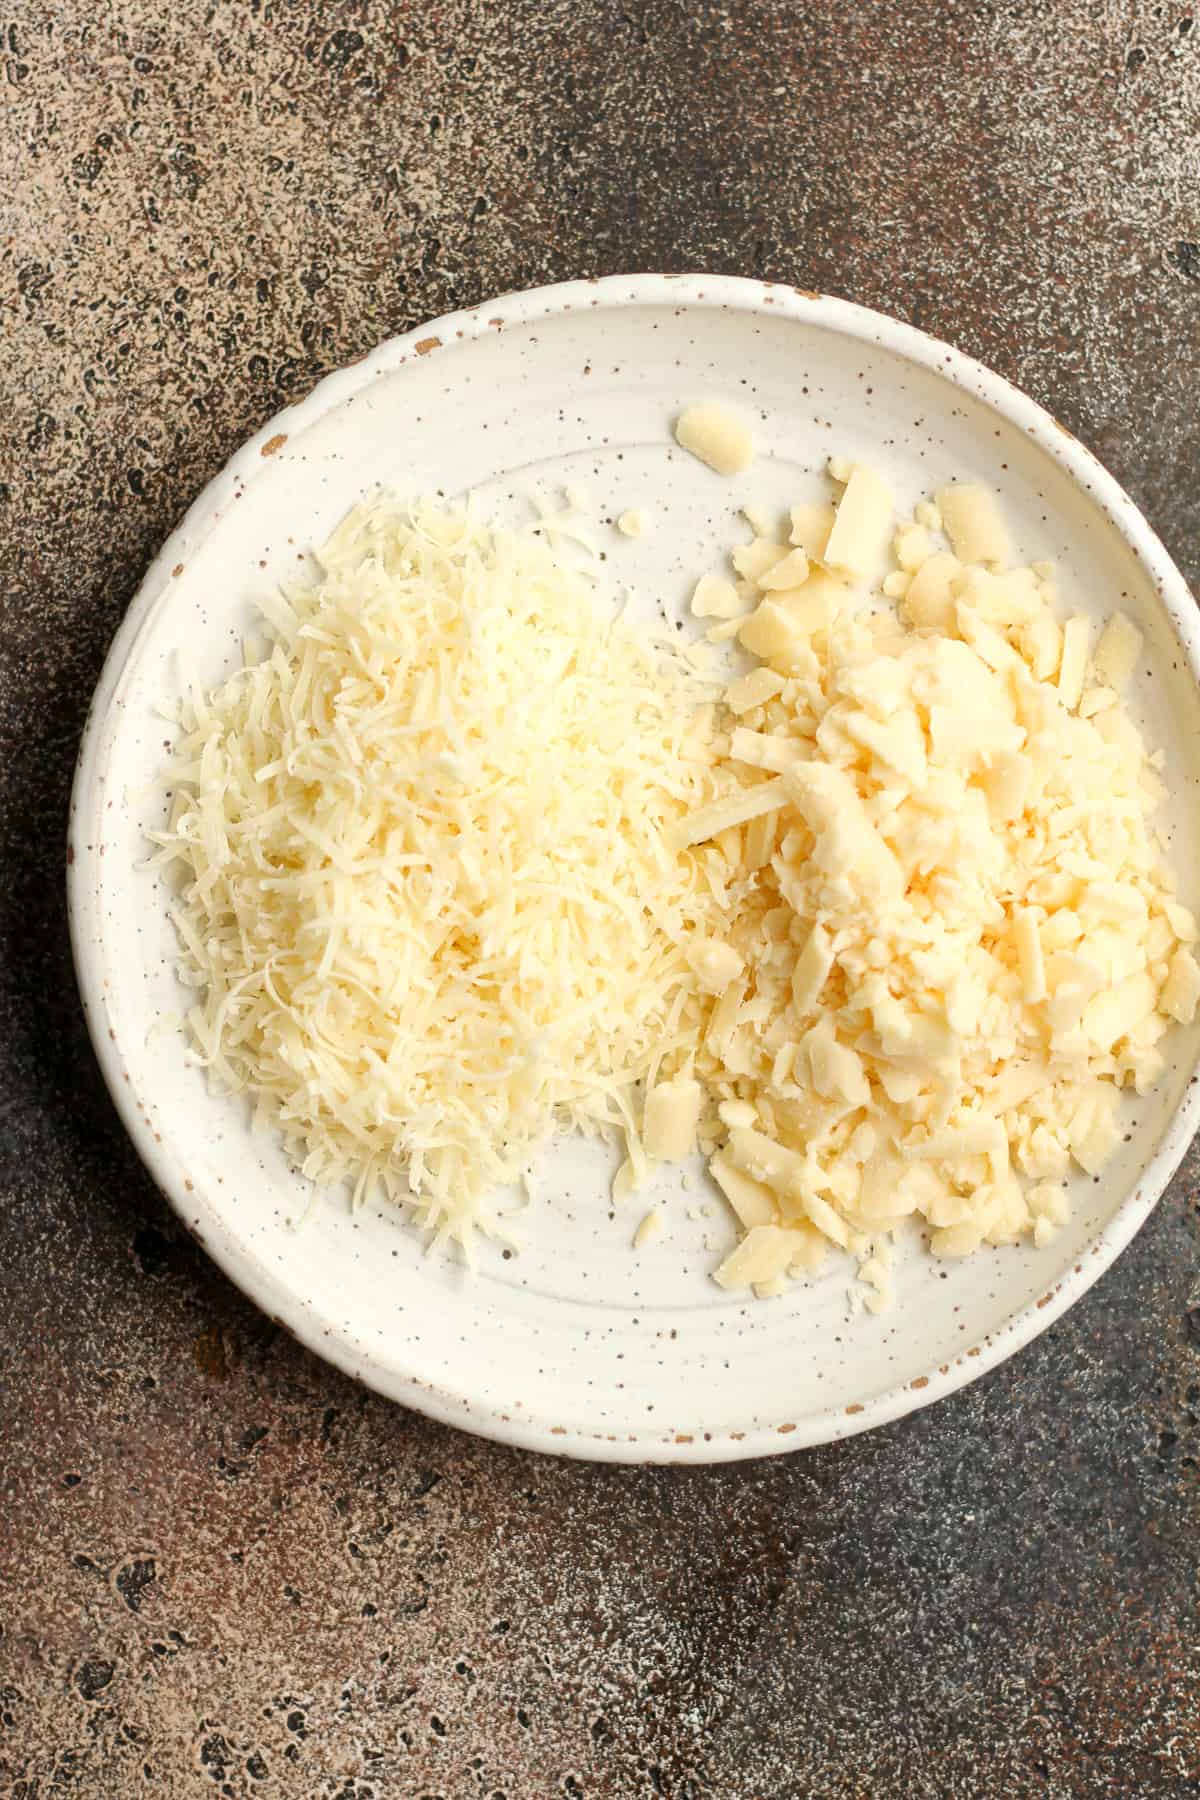 A plate of the parmesan and white cheddar cheese.